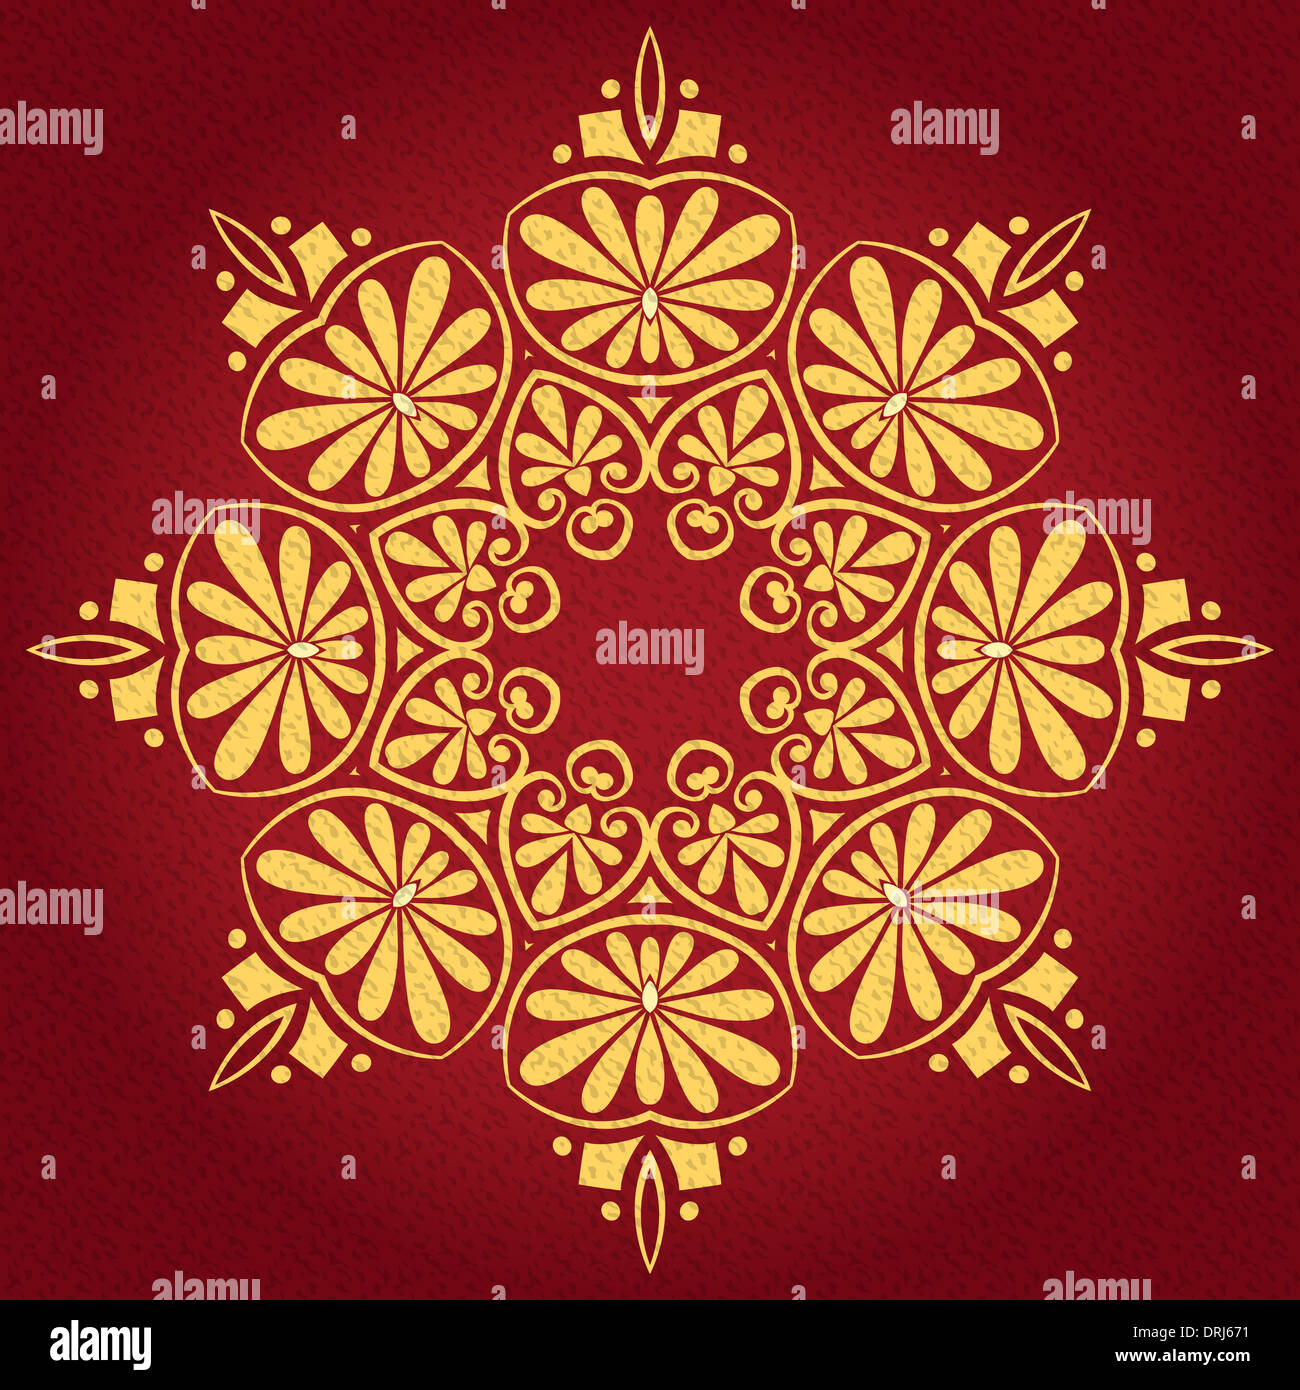 vintage elegant lace gold ornament and floral pattern on a red background Stock Photo